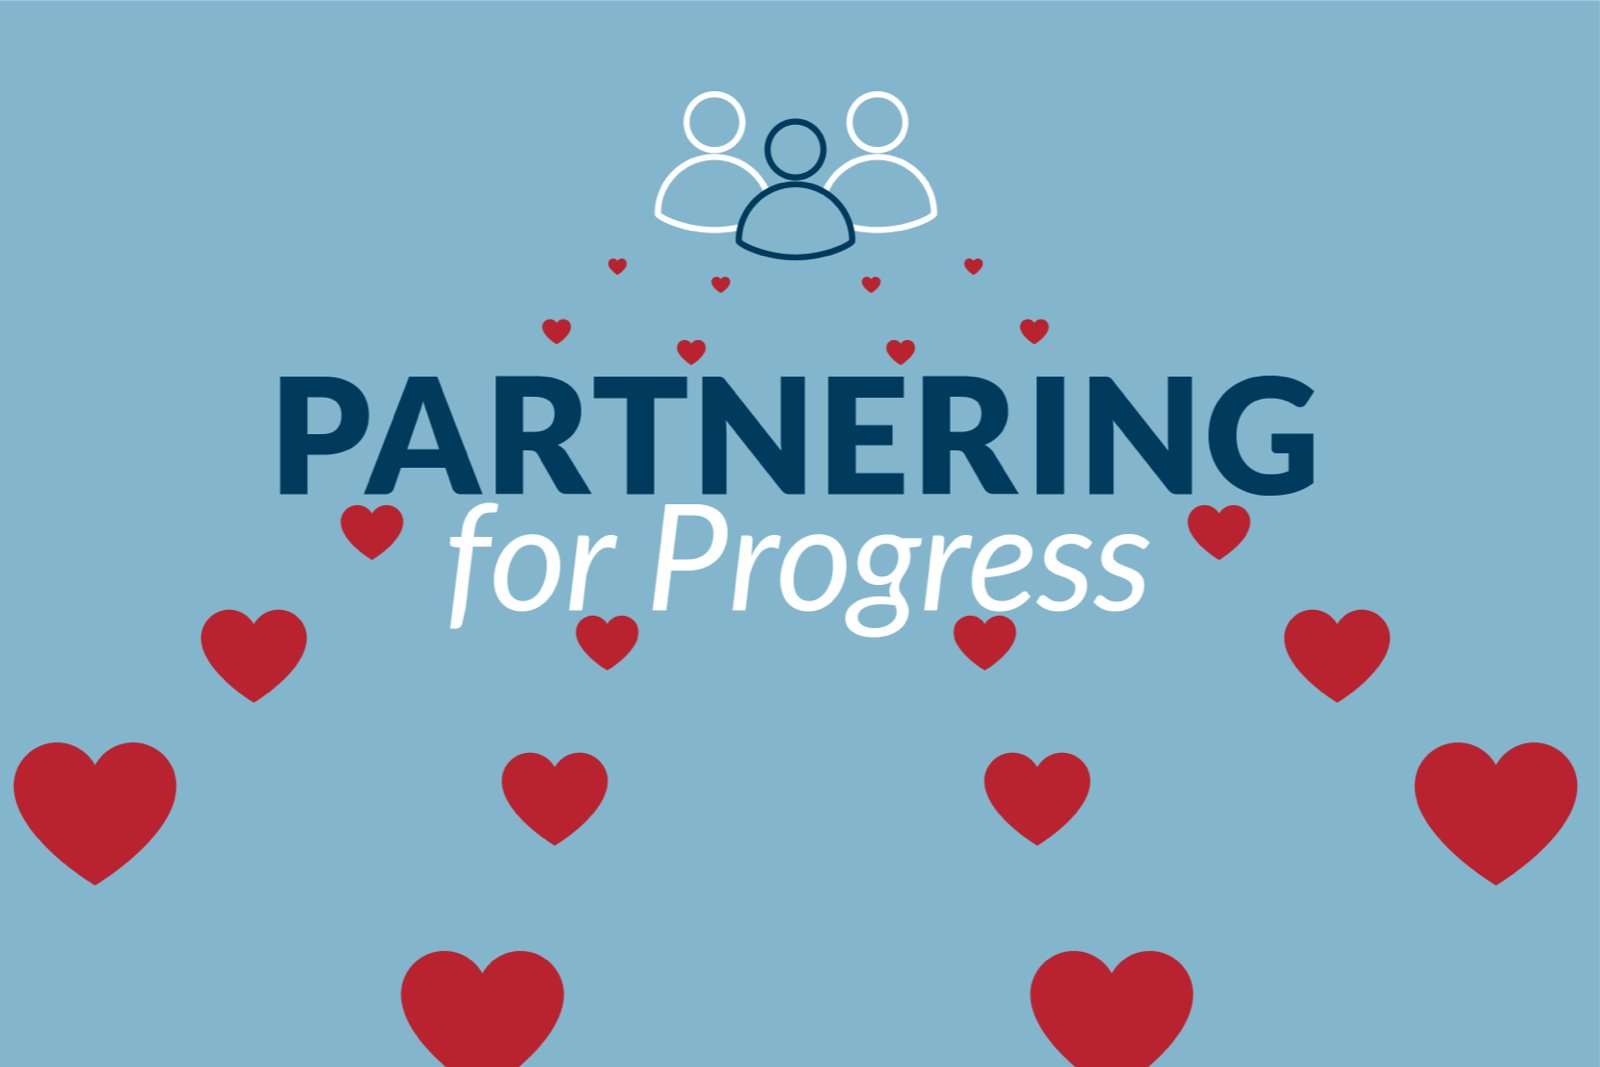 Partnering for Progress Article Featured Image